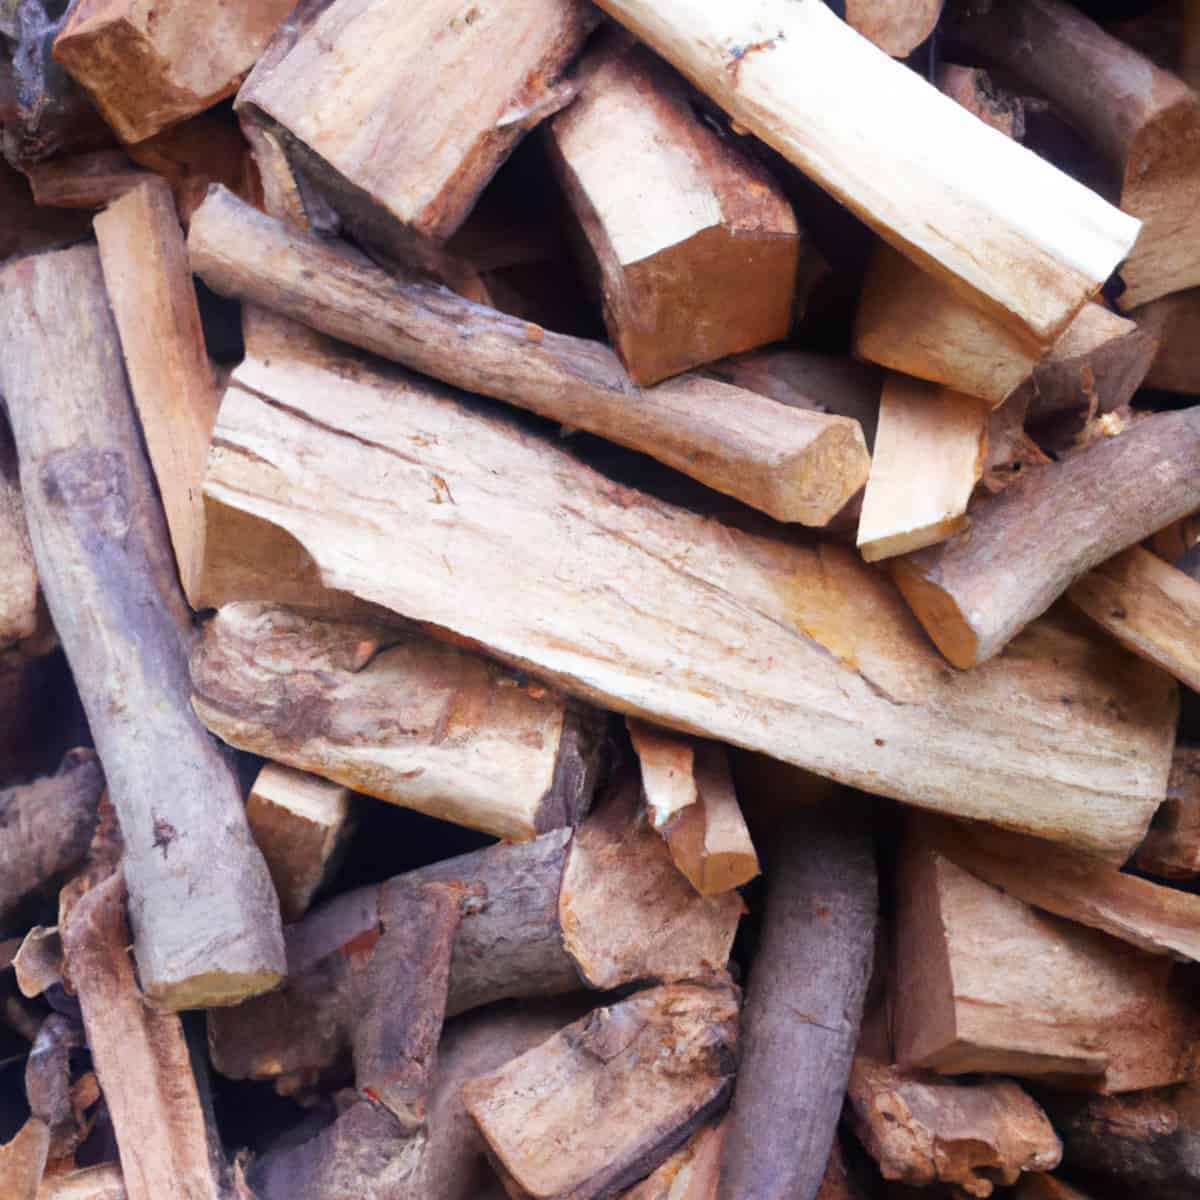 Plum (Prunus) Wood: Its Role in Smoking Meat & How to Use it